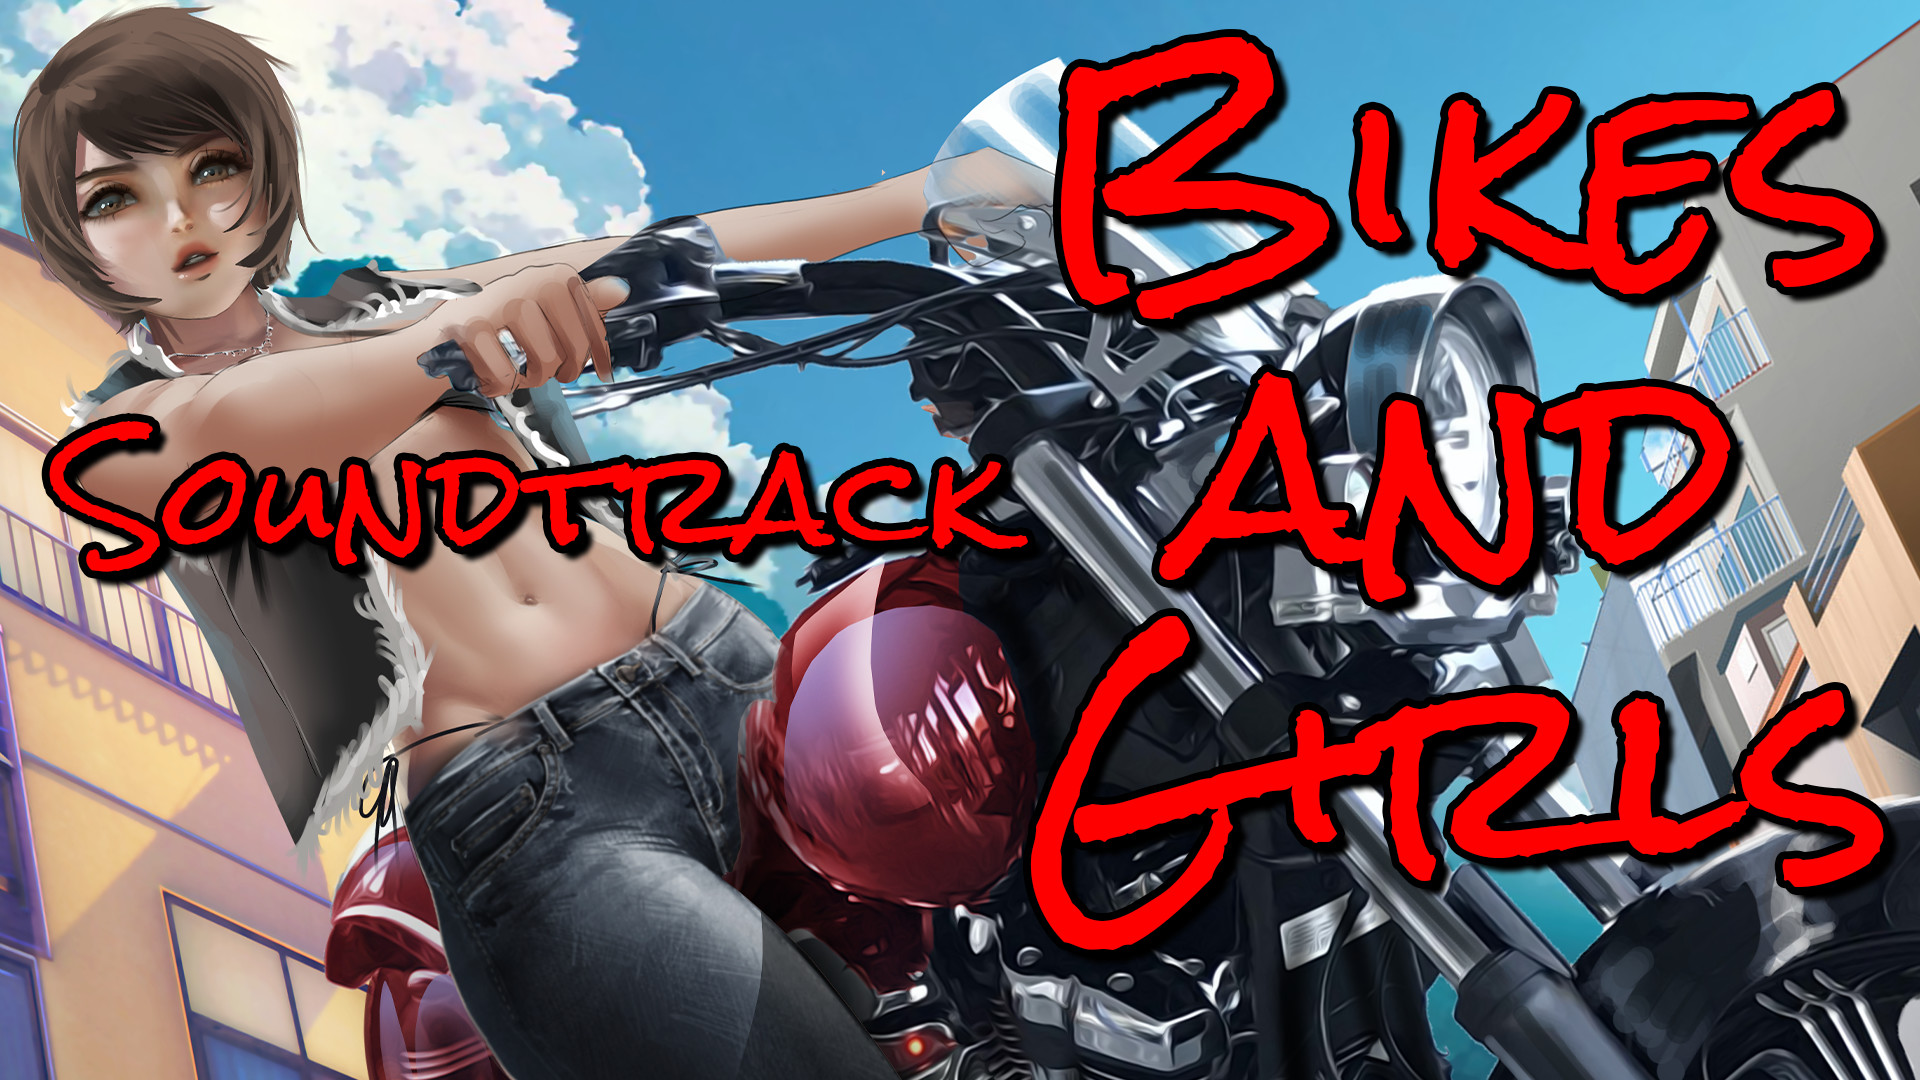 Bikes and Girls Soundtrack Featured Screenshot #1